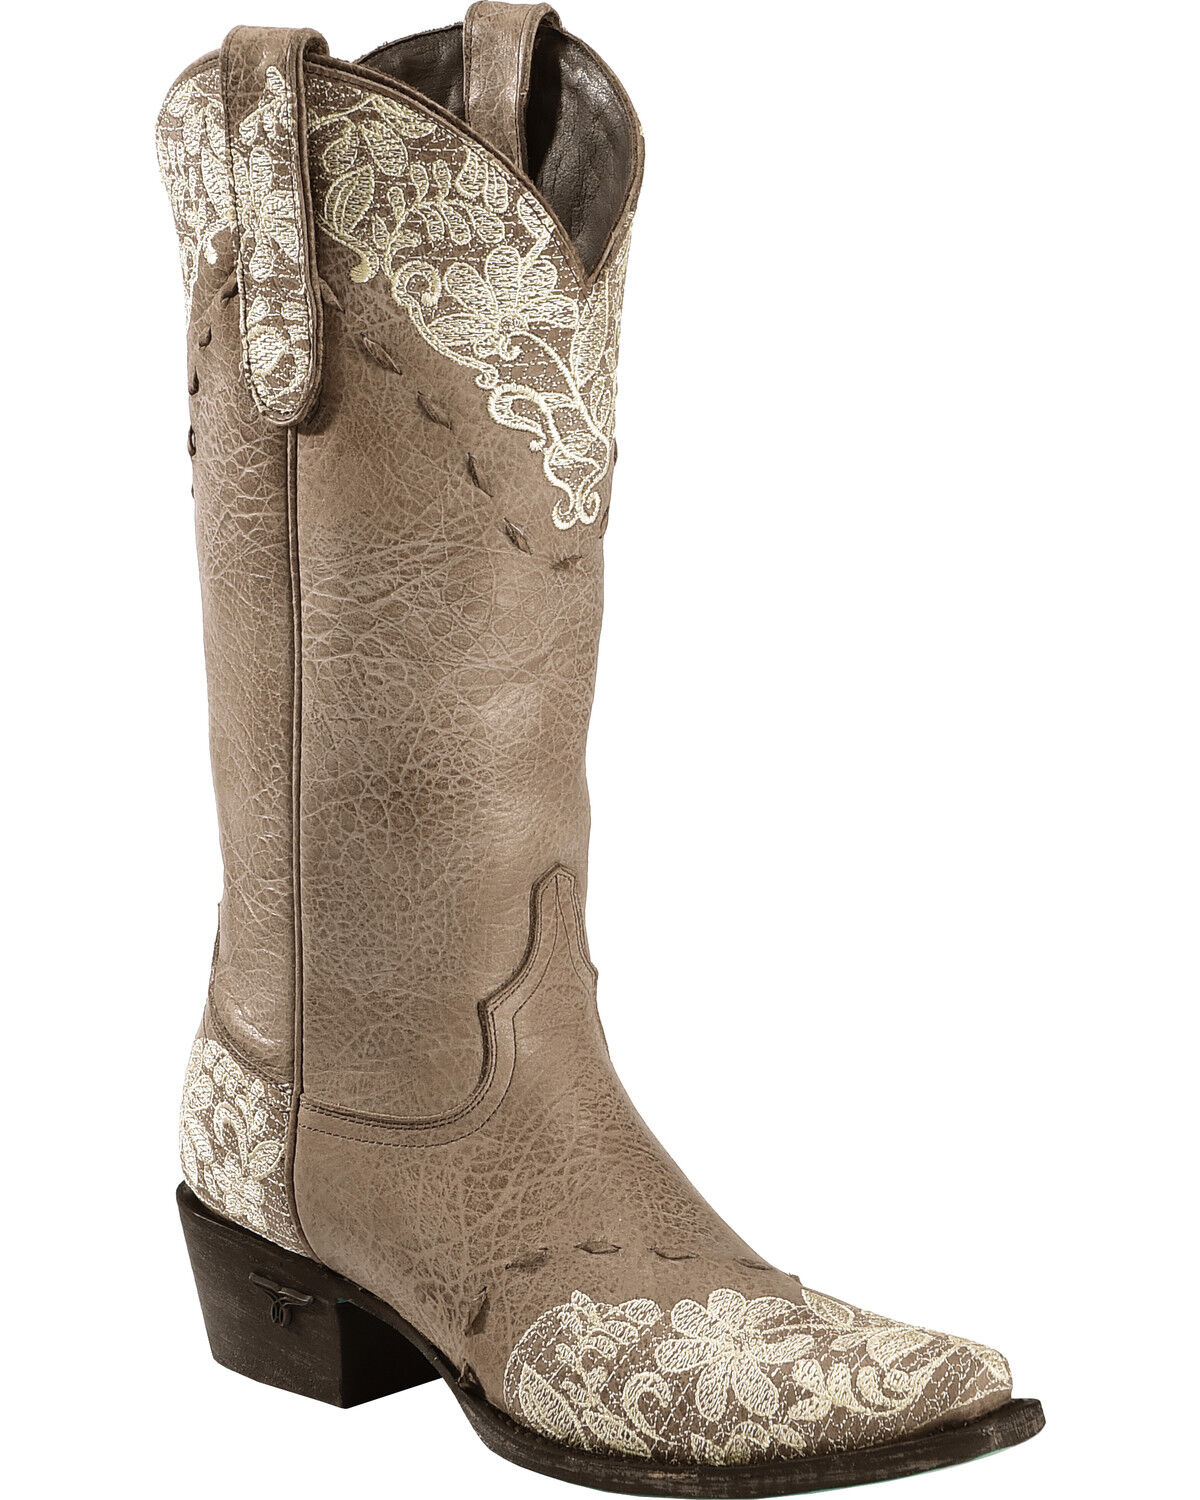 boots with lace